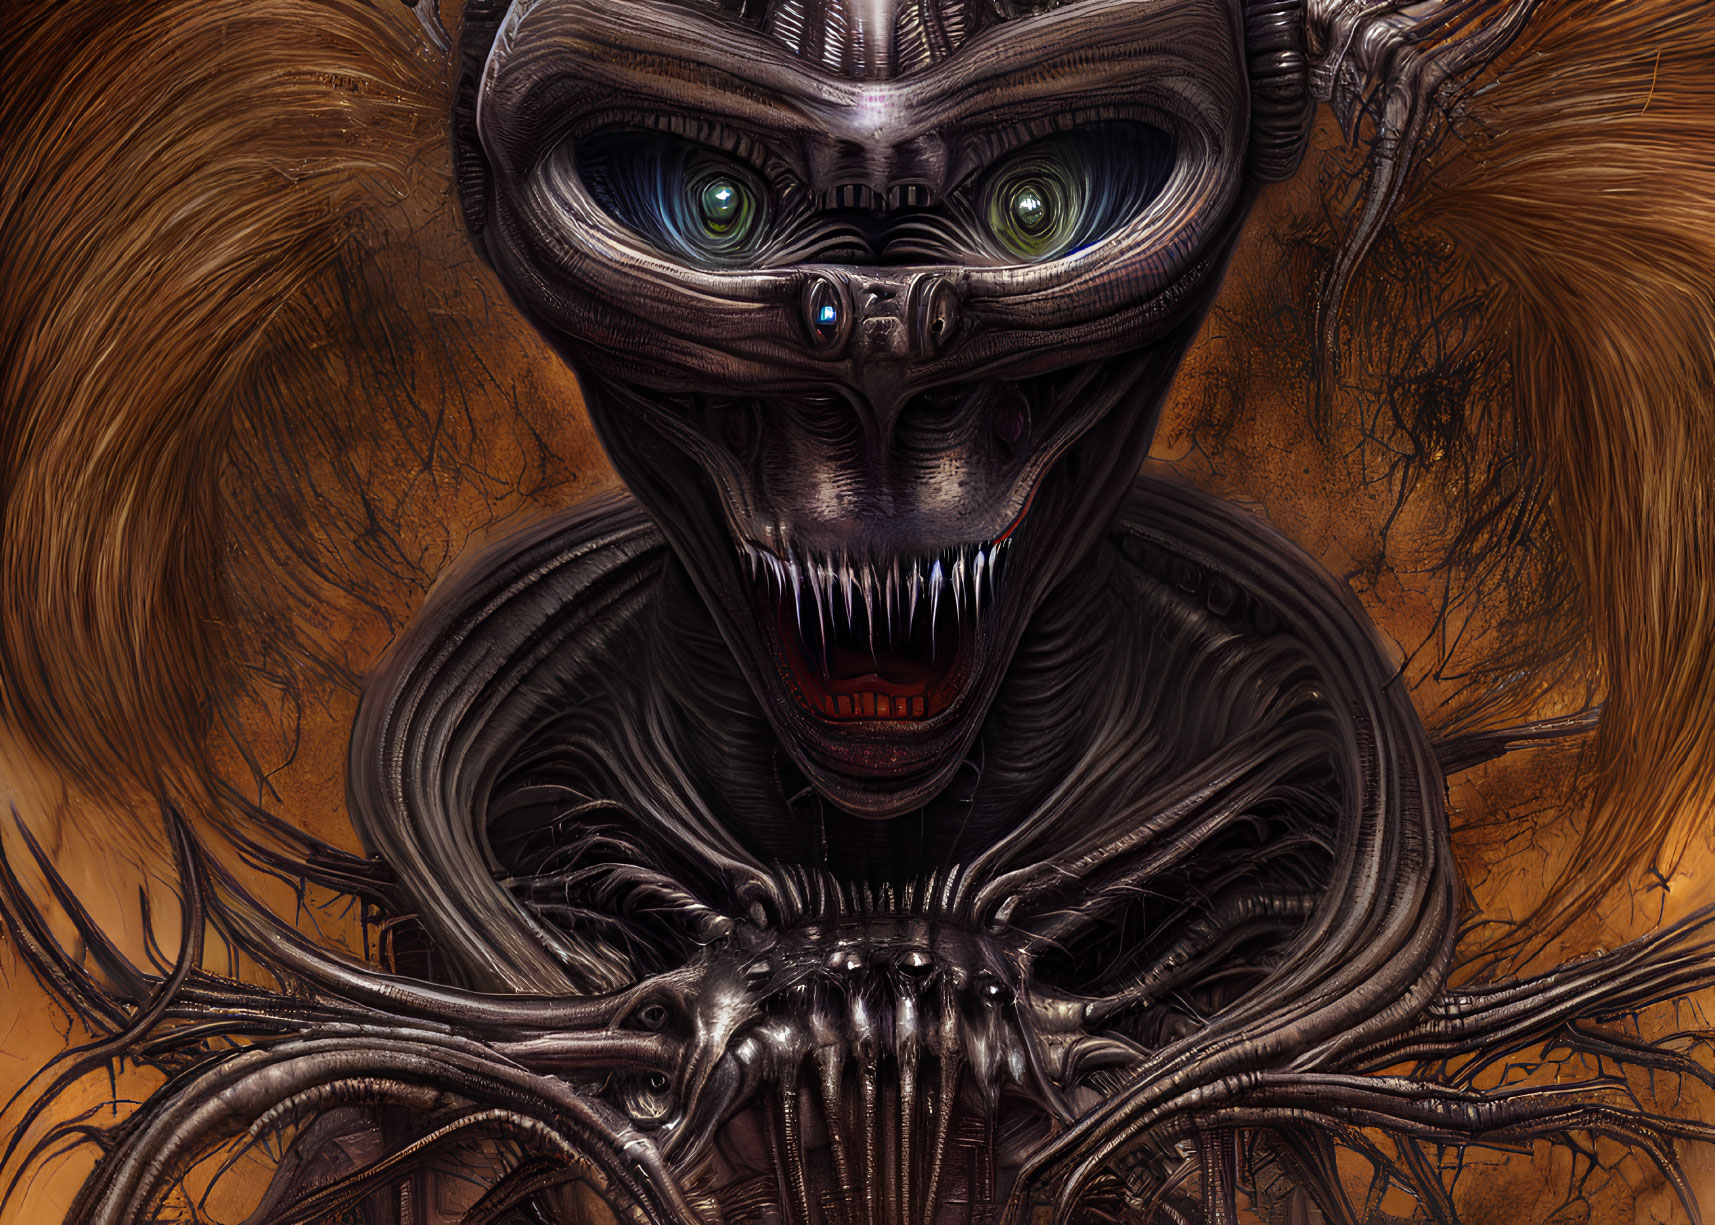 Detailed Digital Art: Menacing Alien with Green Eyes and Biomechanical Features